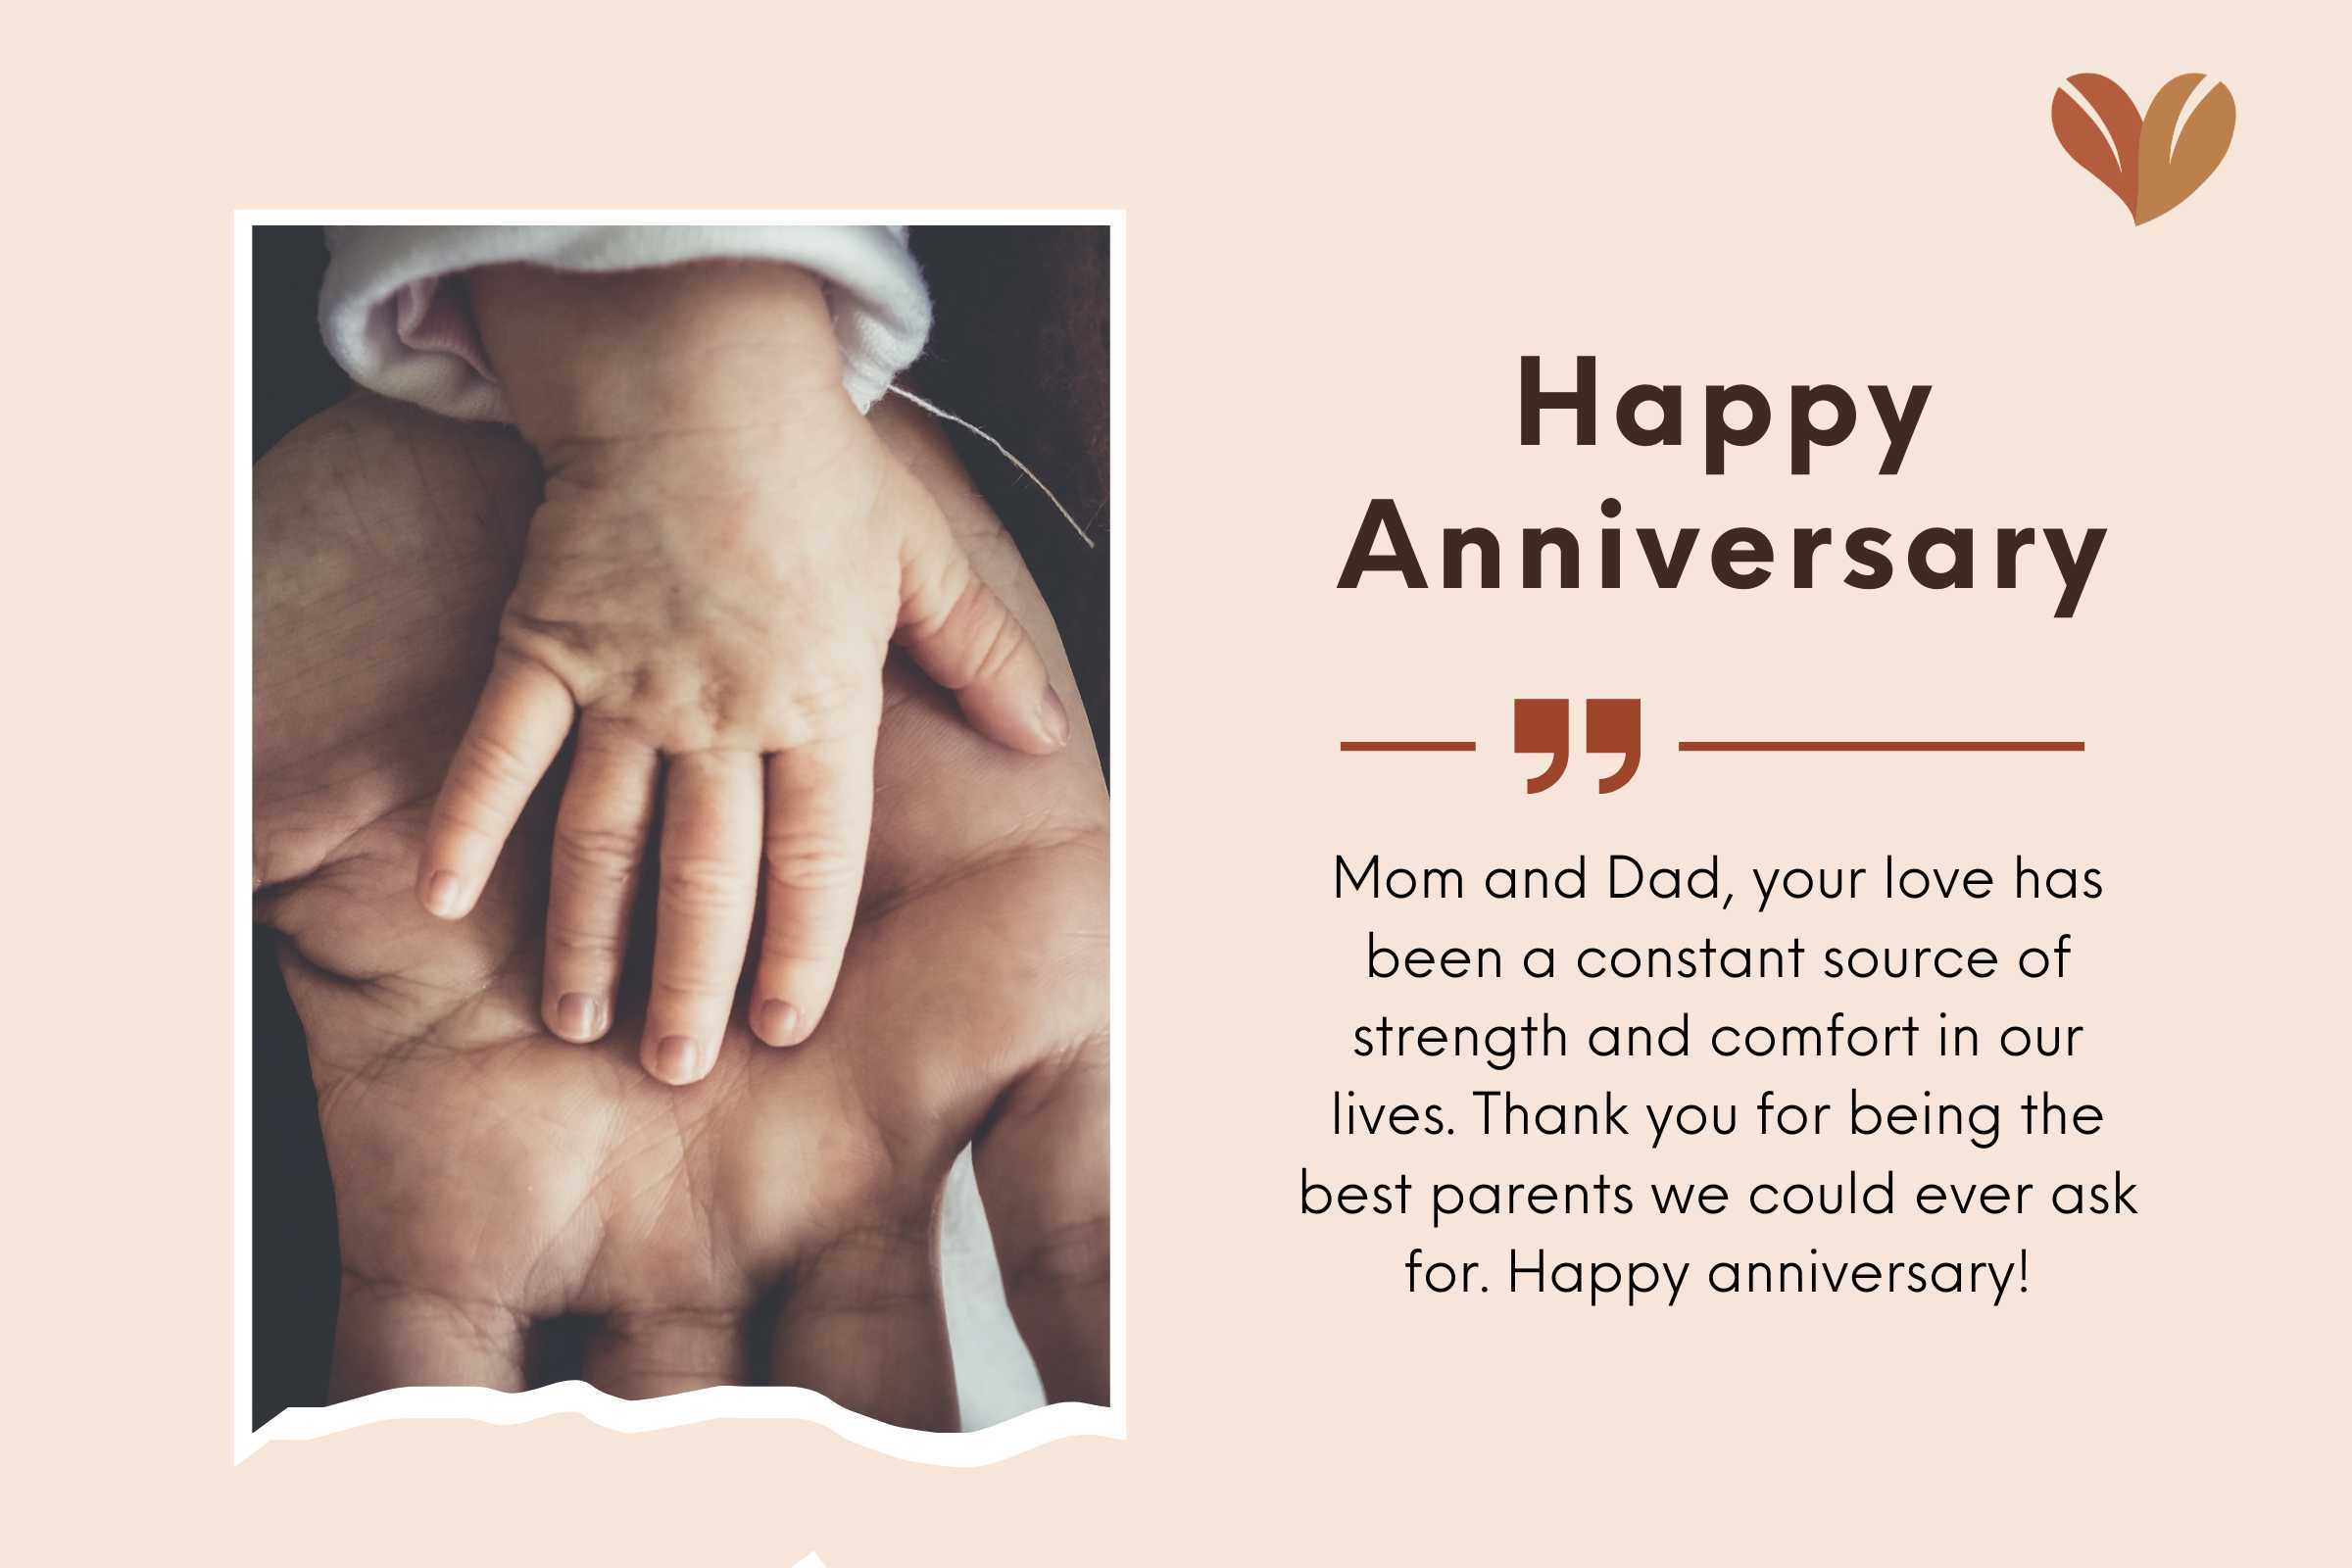 Celebrate the love that has stood the test of time - anniversary wishes for parents